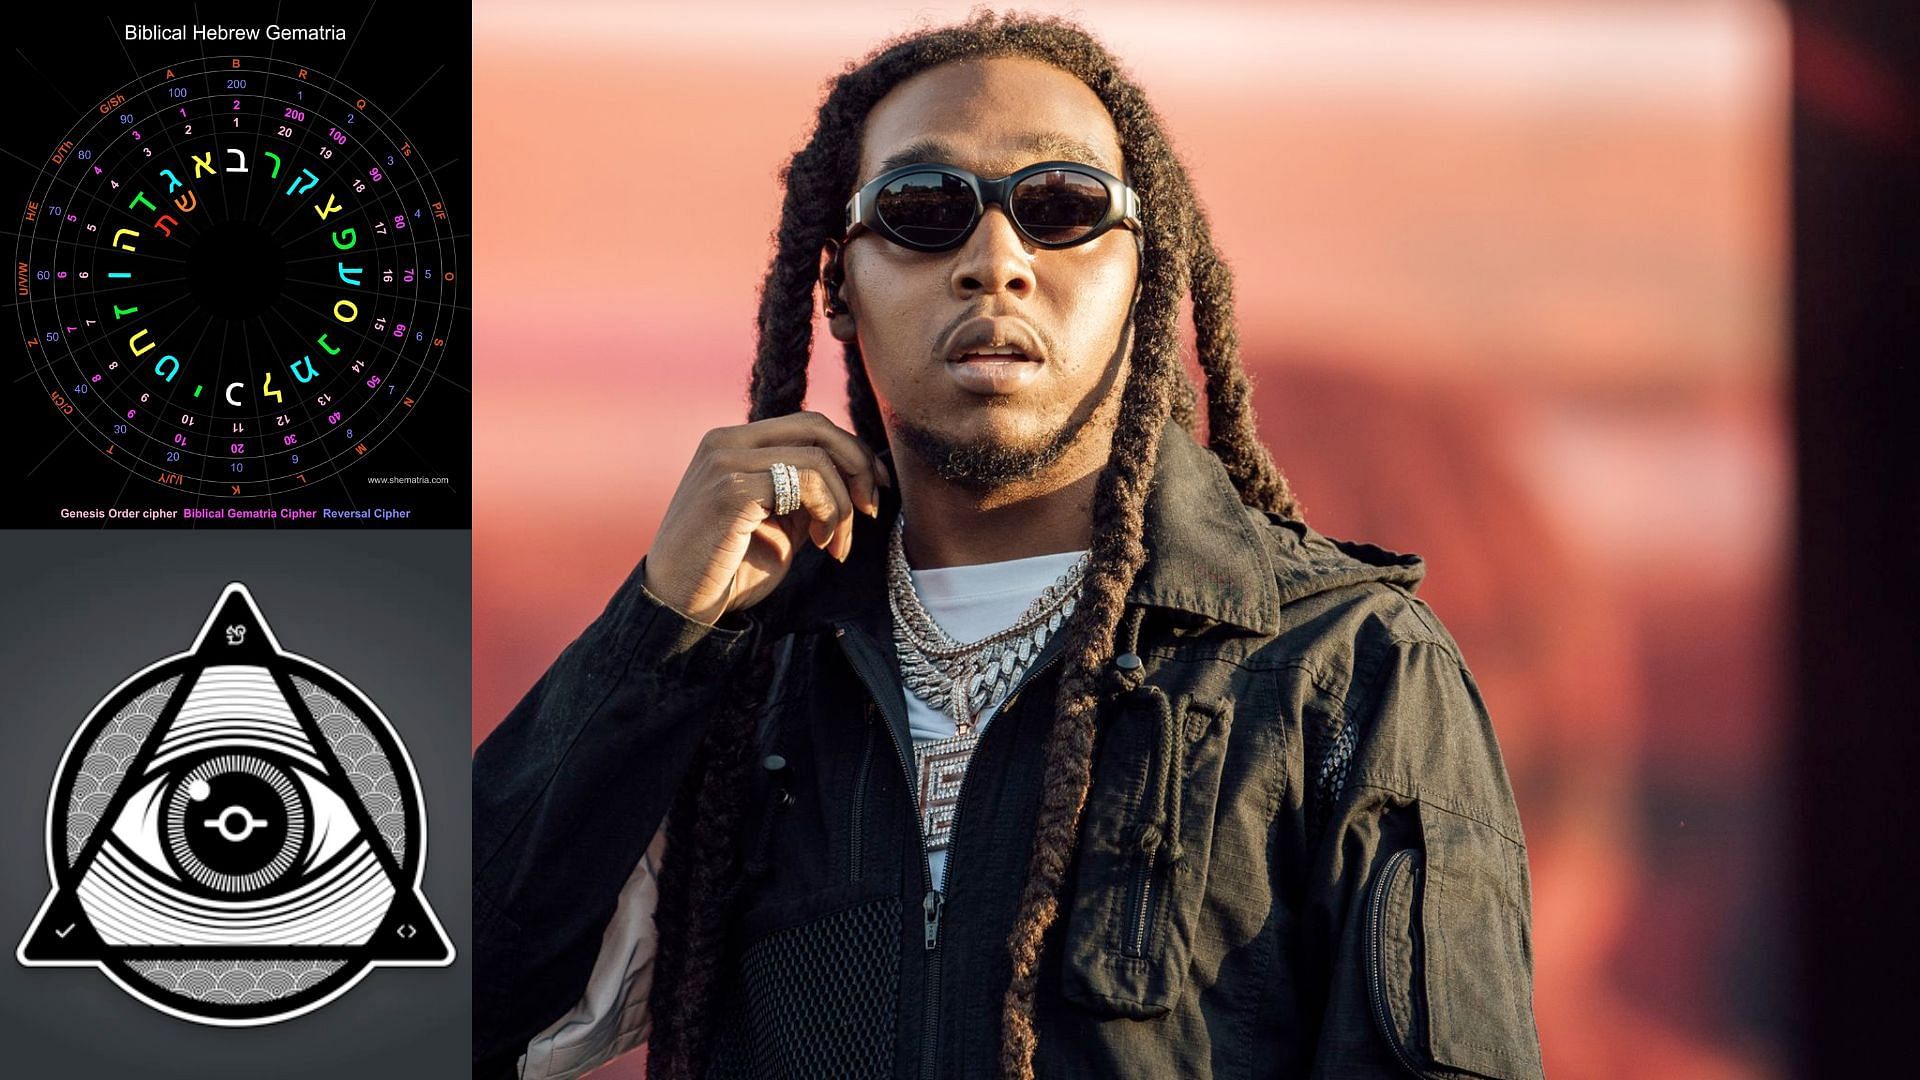 Fans consider many theories to understand Takeoff